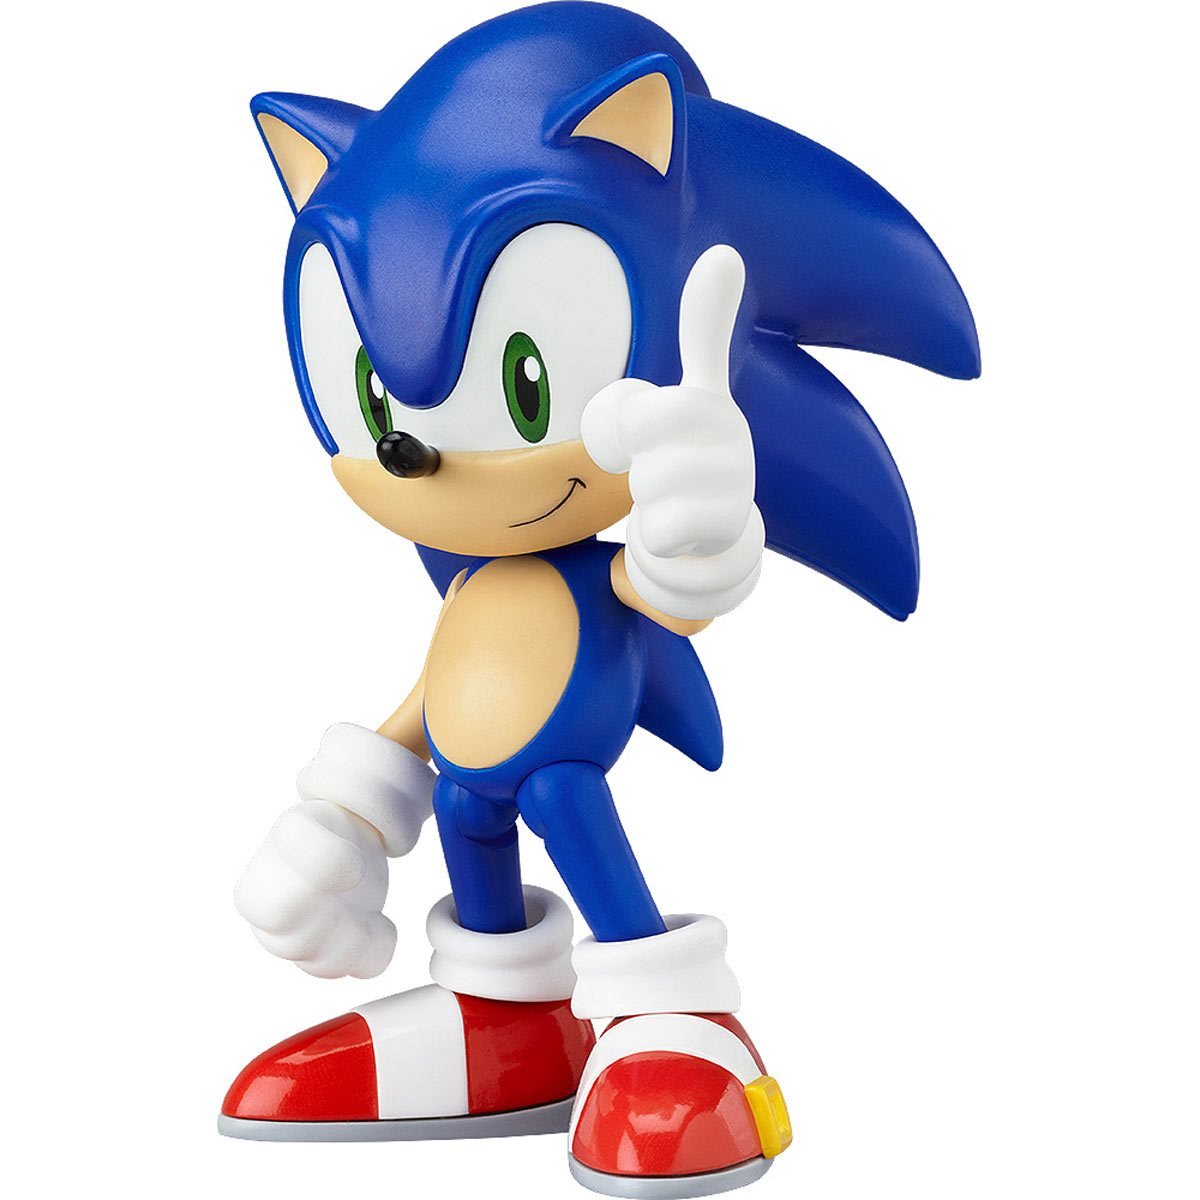  Sonic Action Figures Toys, 18 Pcs Action Figures for